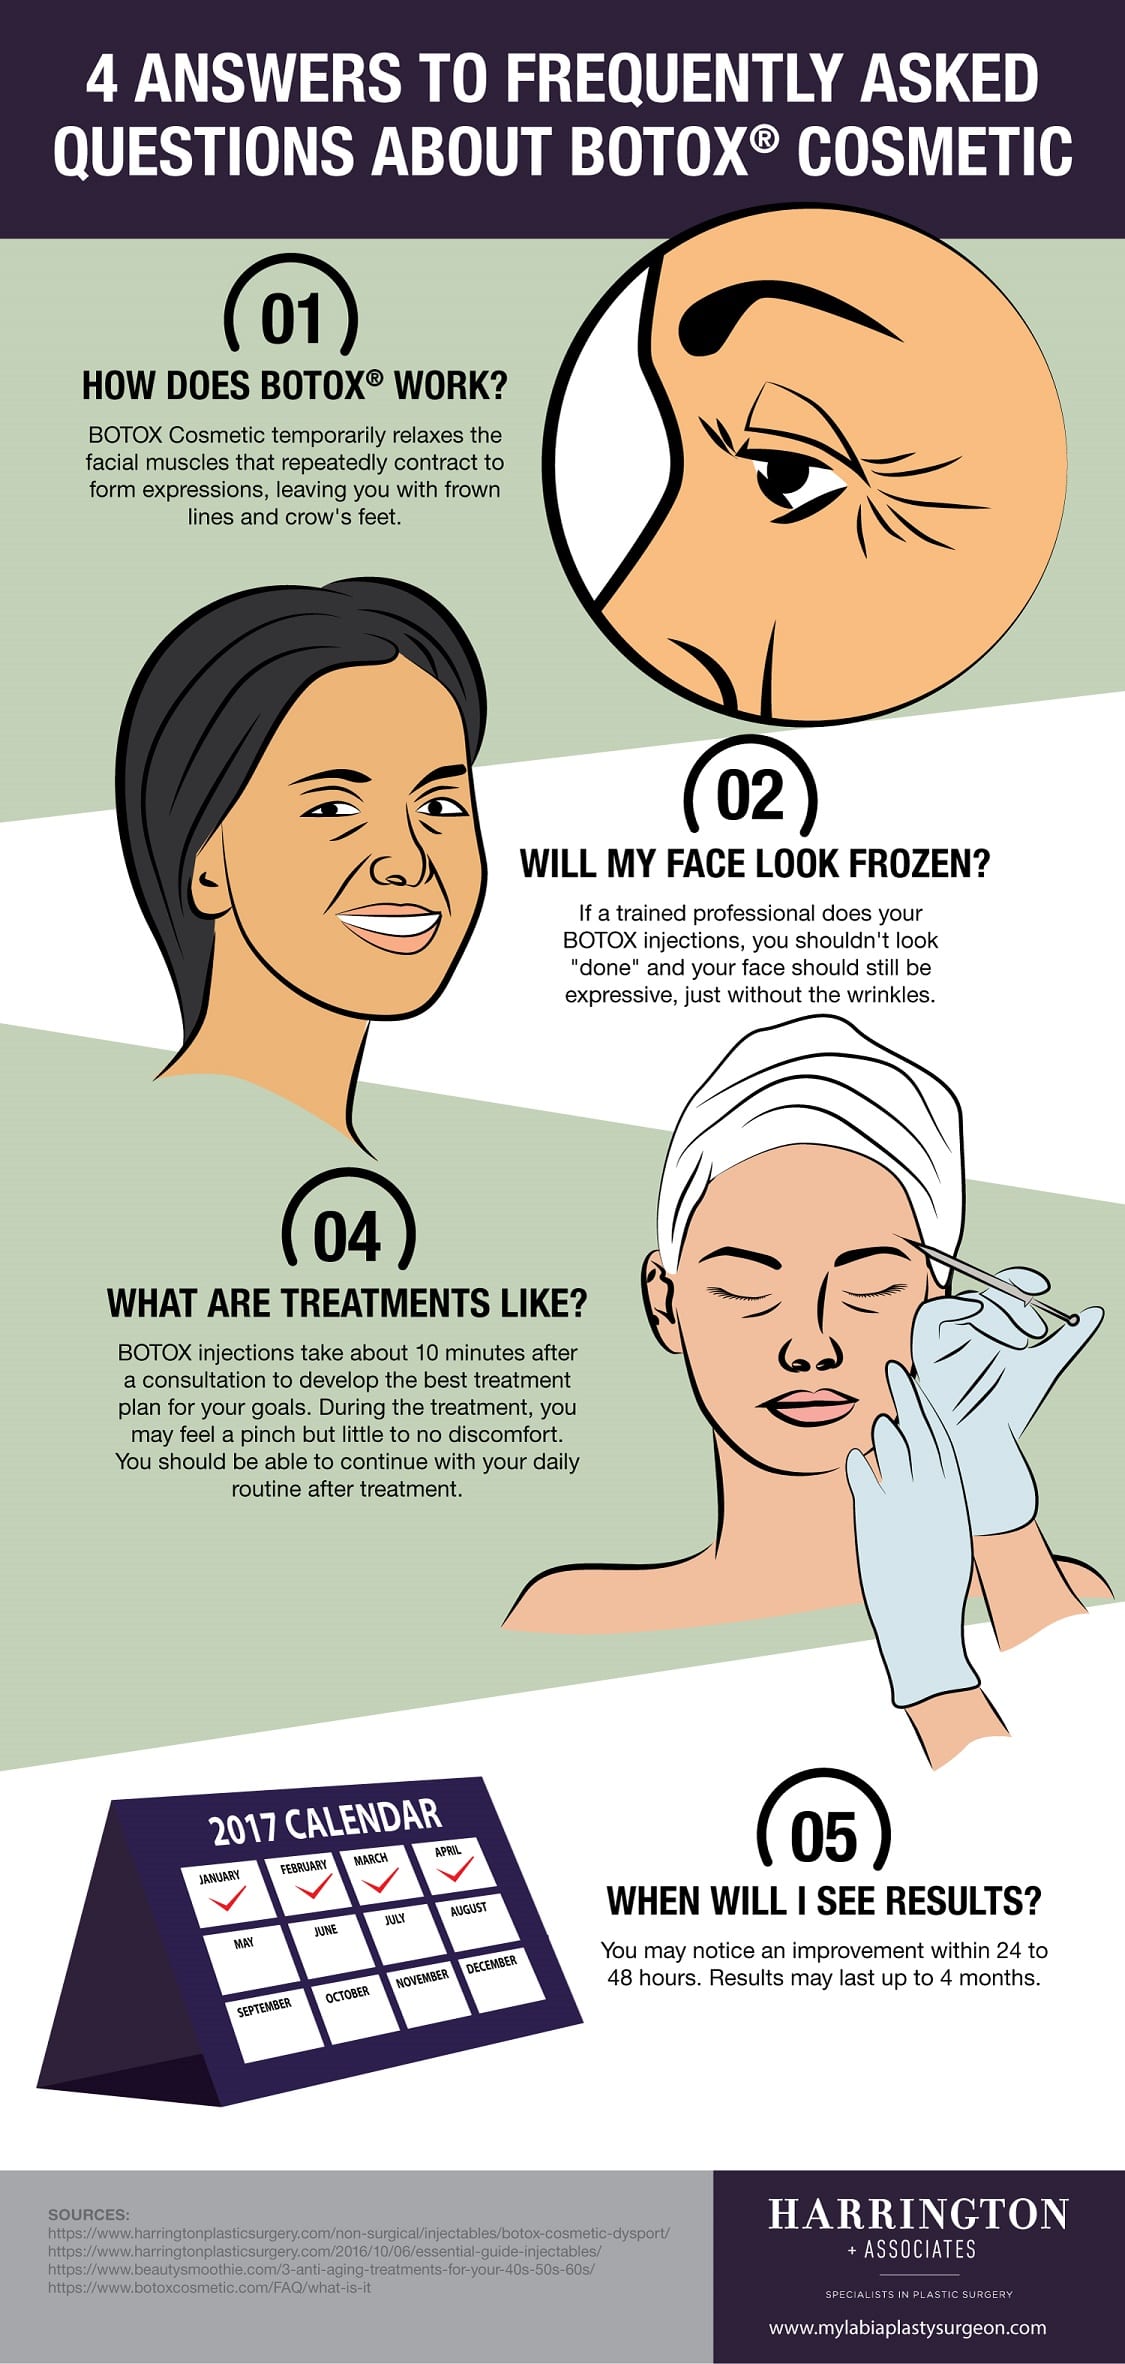 4 Answers to Frequently Asked Questions about BOTOX Cosmetic [Infographic]